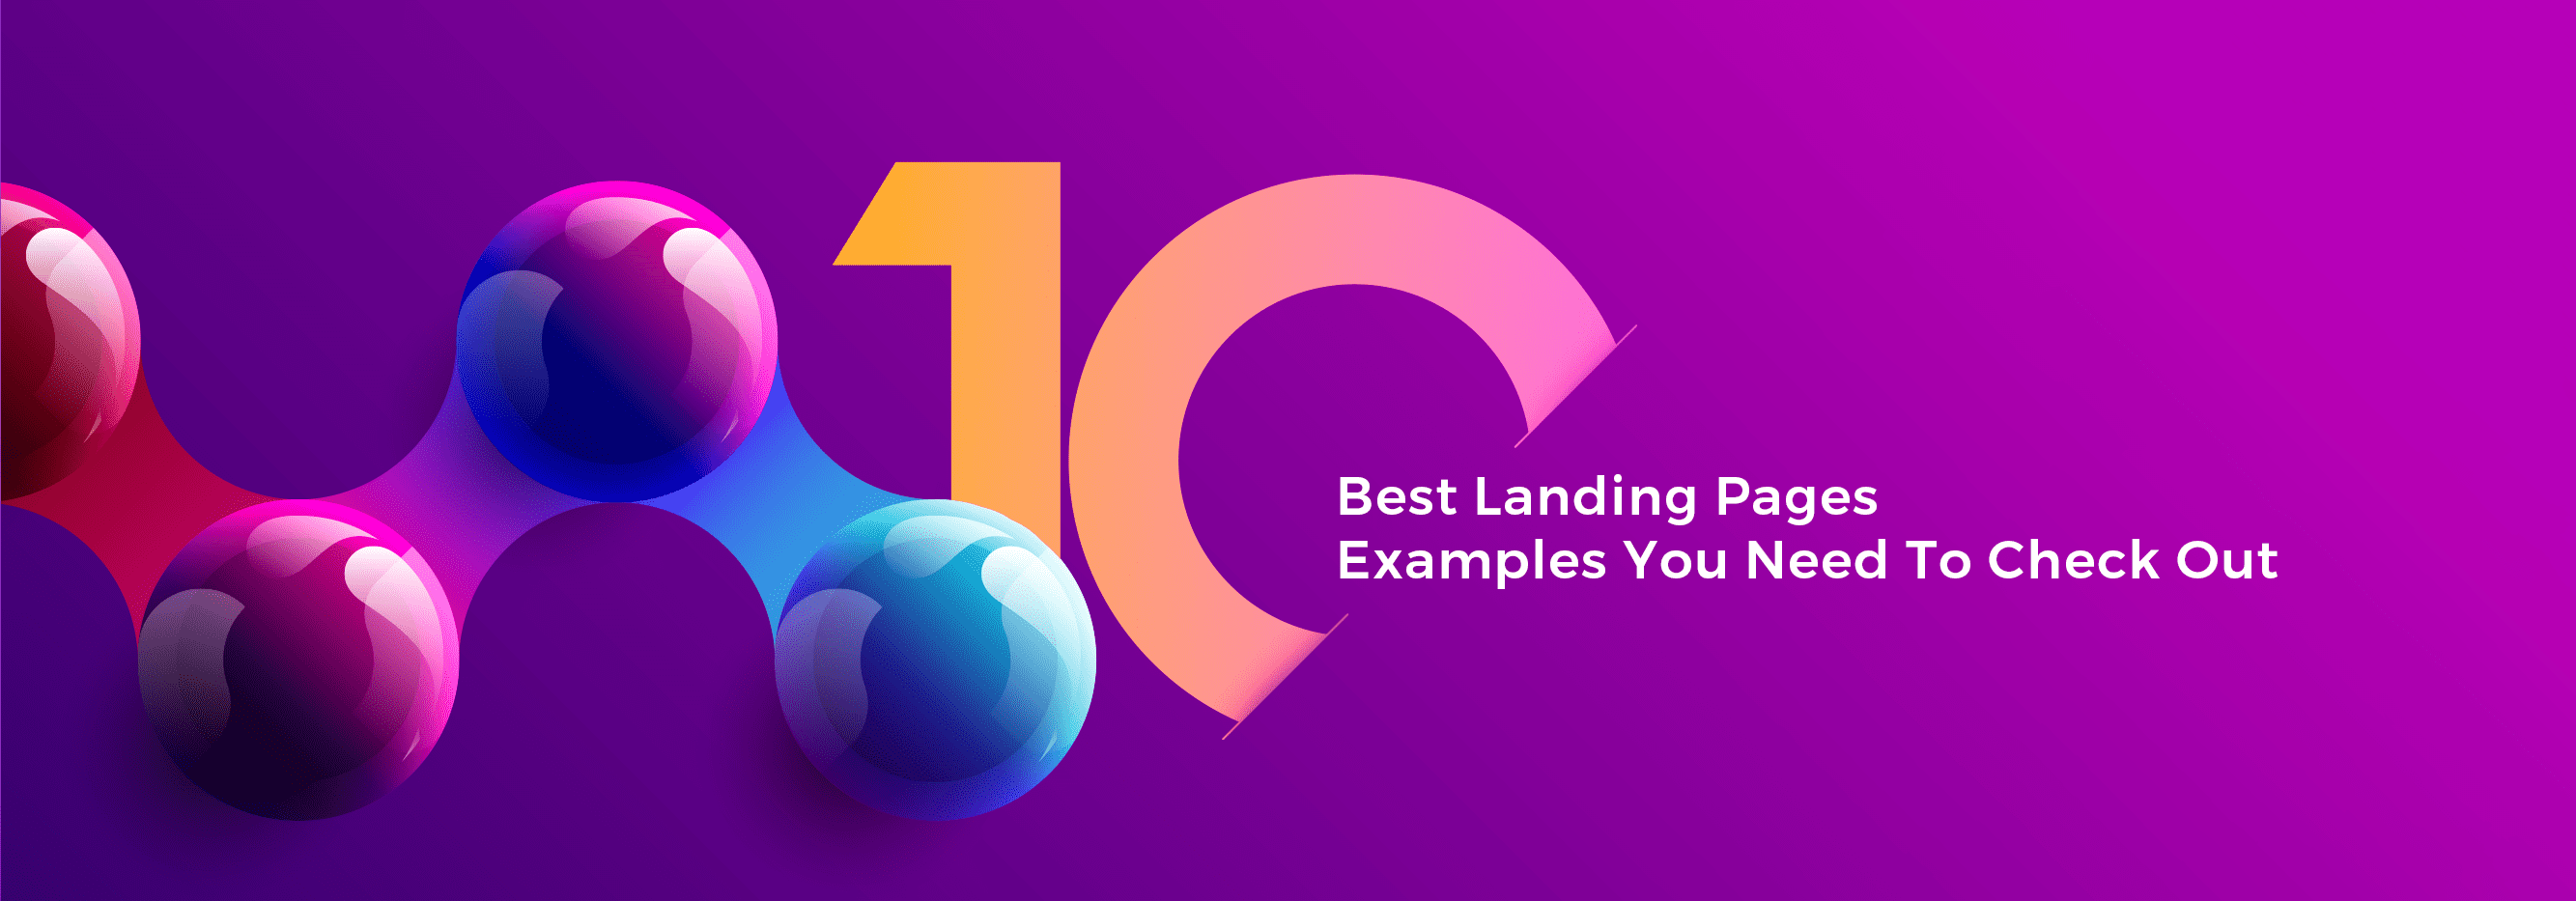 Best Landing Pages Examples